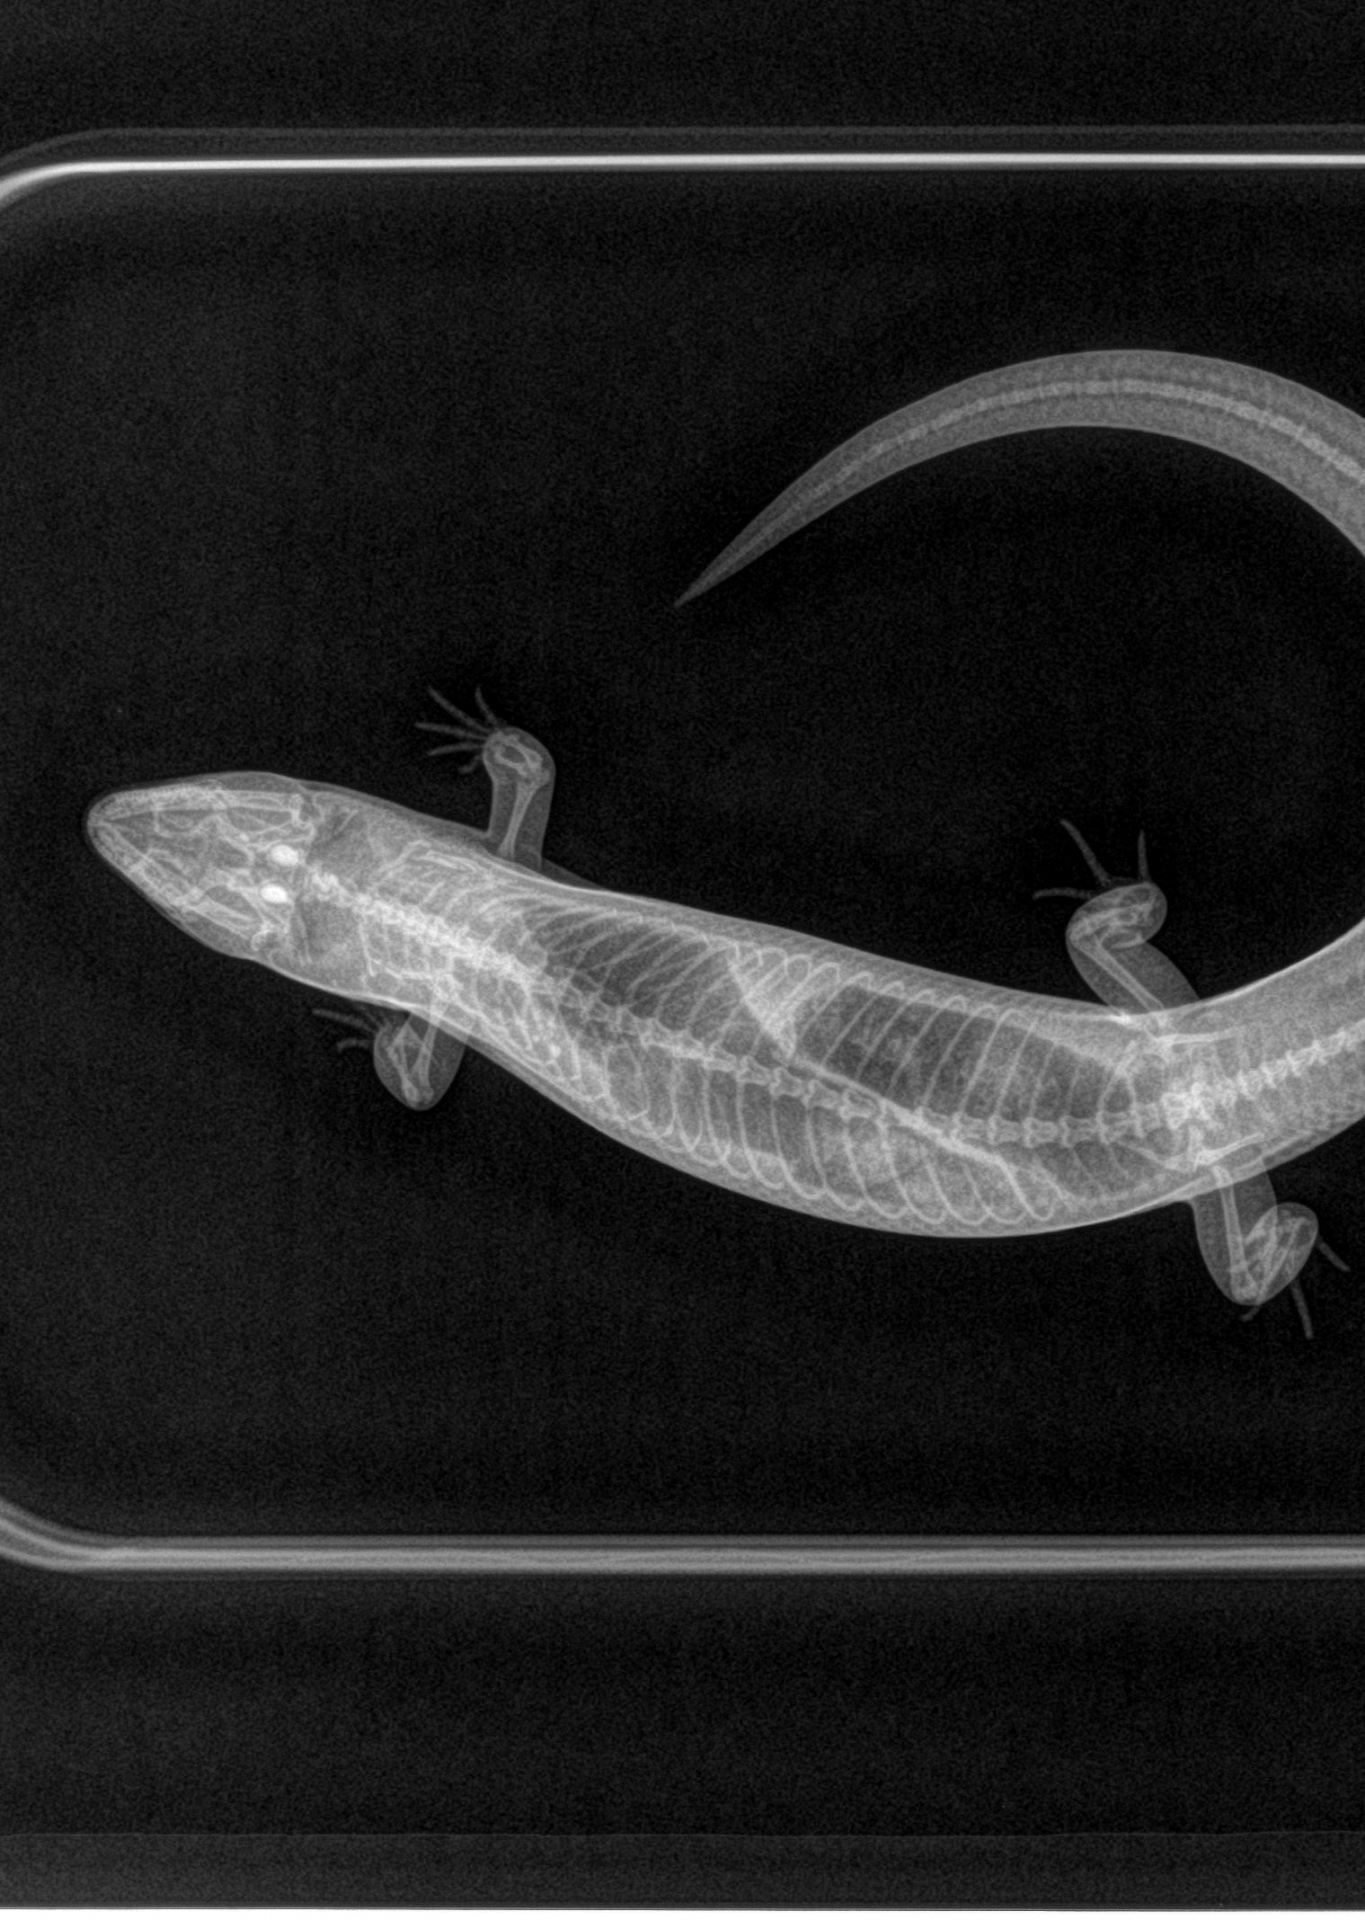 An image of an x-ray of a lizard from above.